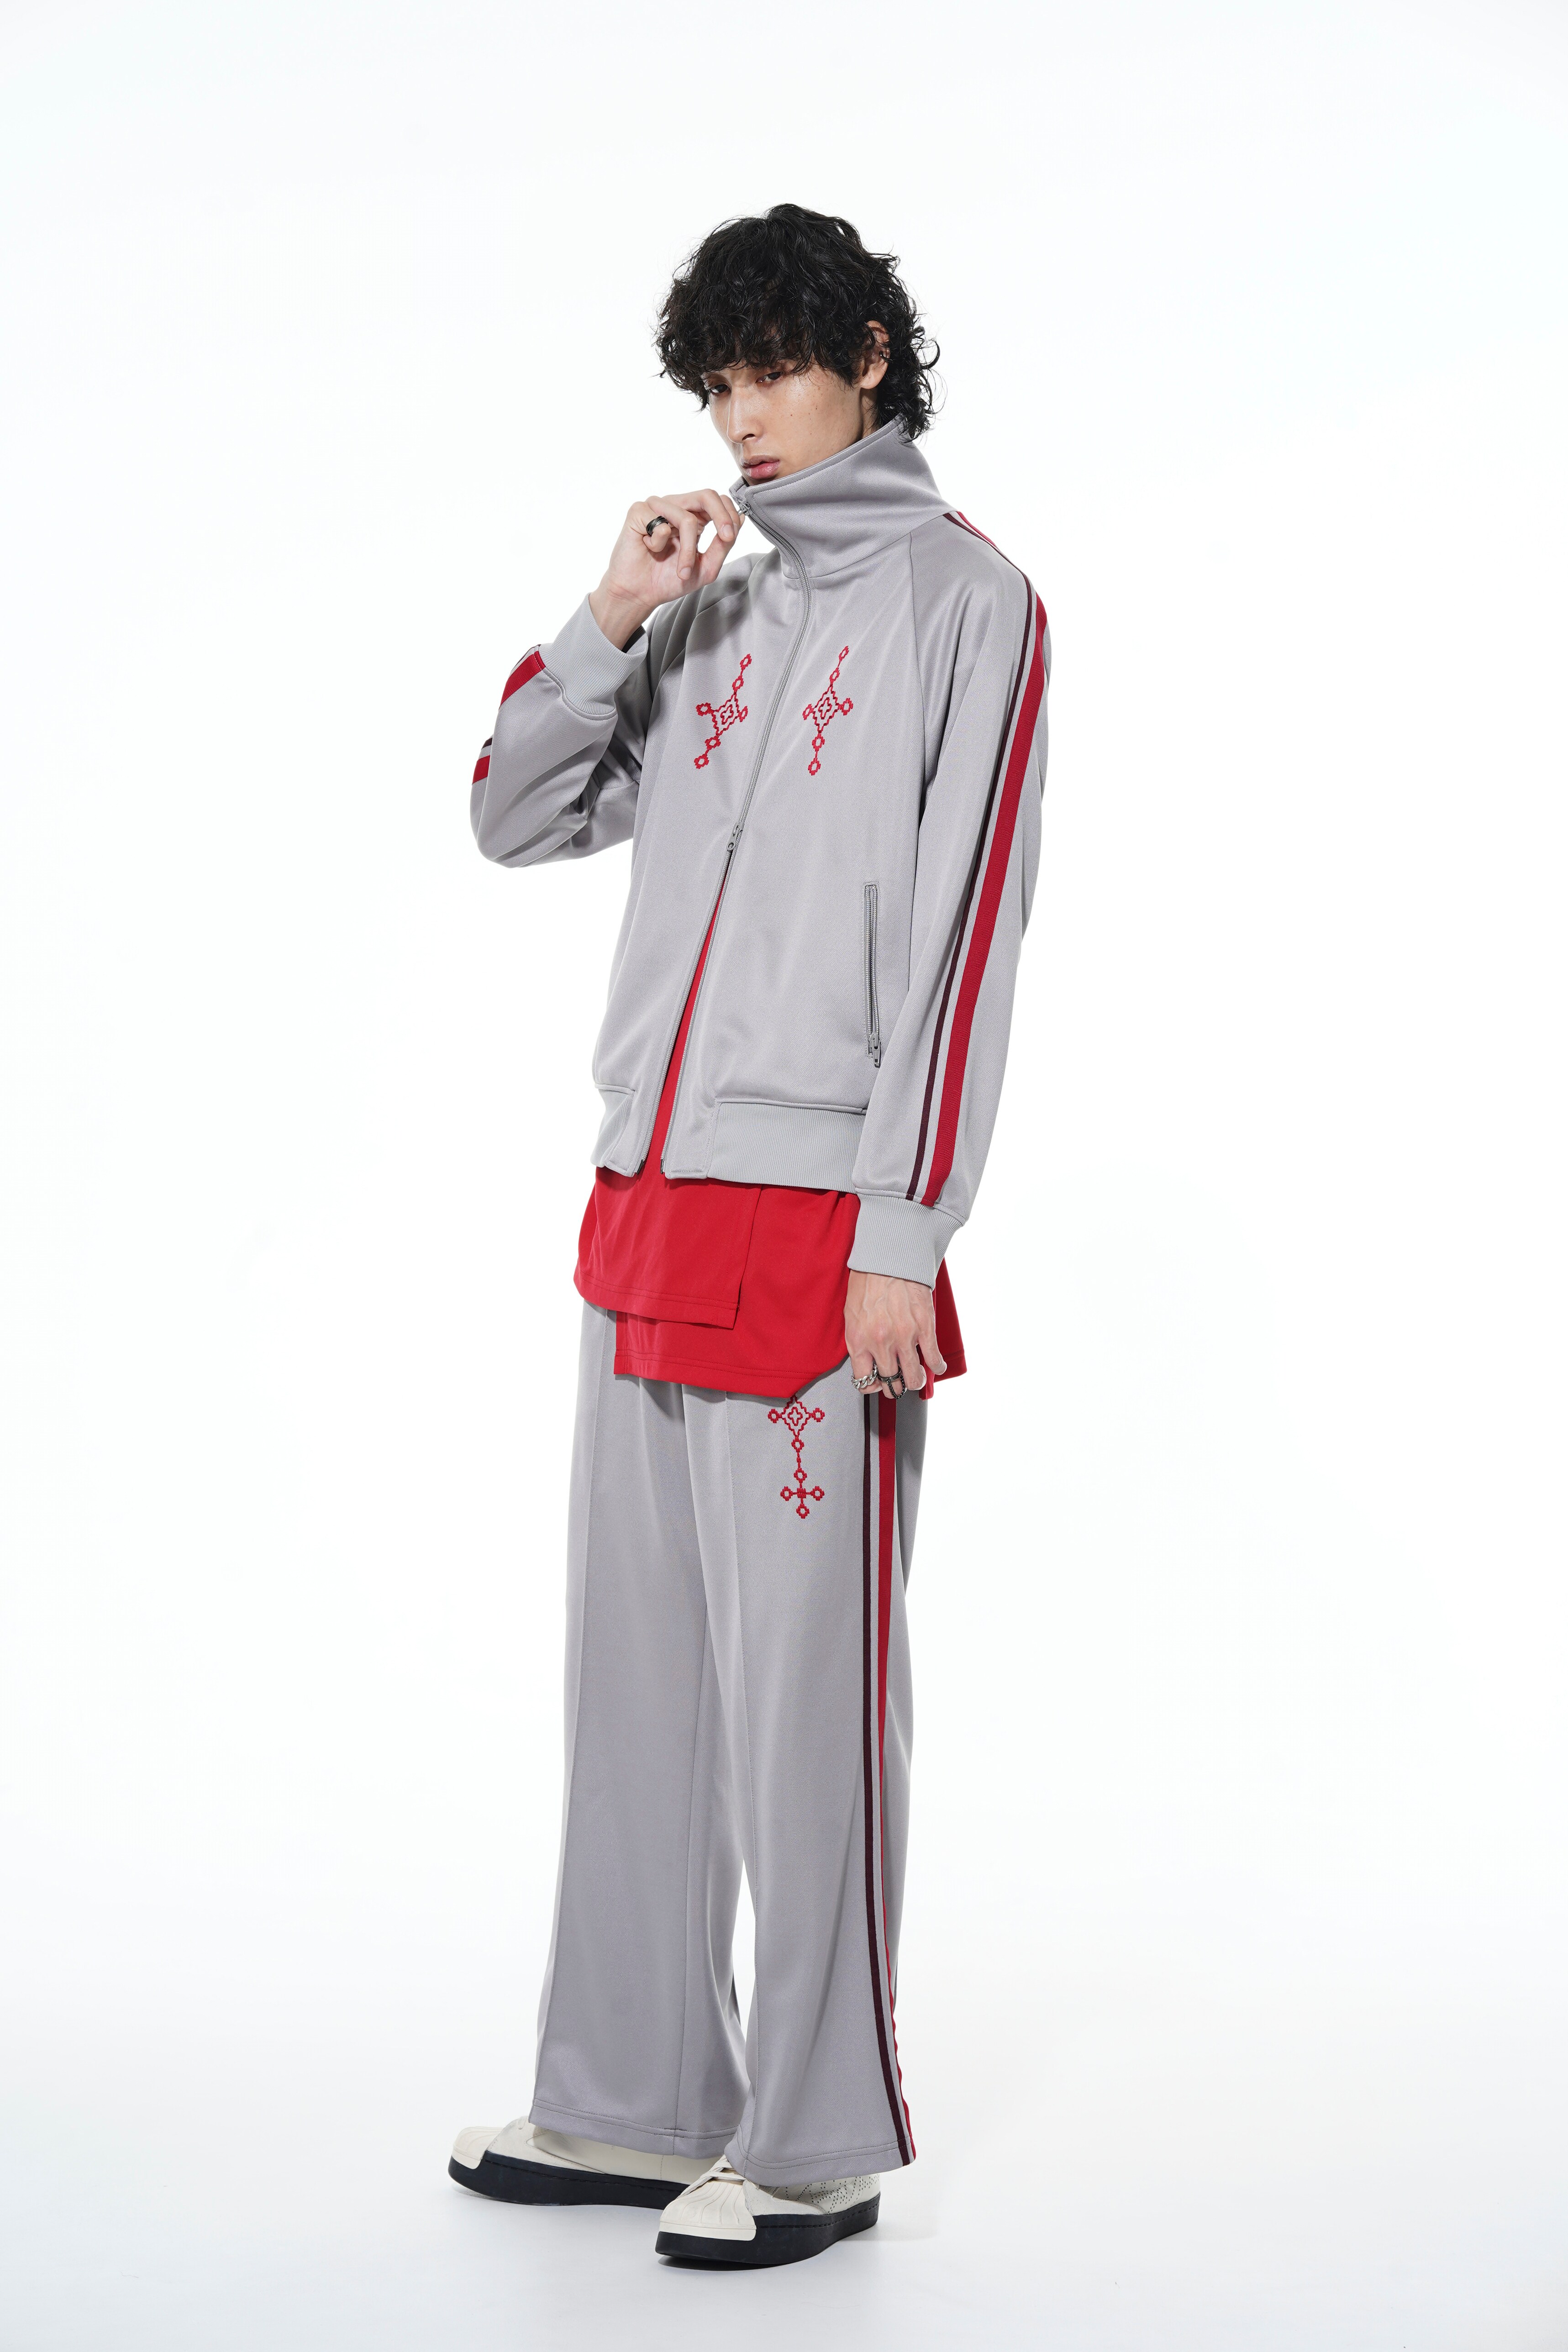 Pe/Smooth Jersey Geometric pattern Embroidery Tape Line Track Jacket